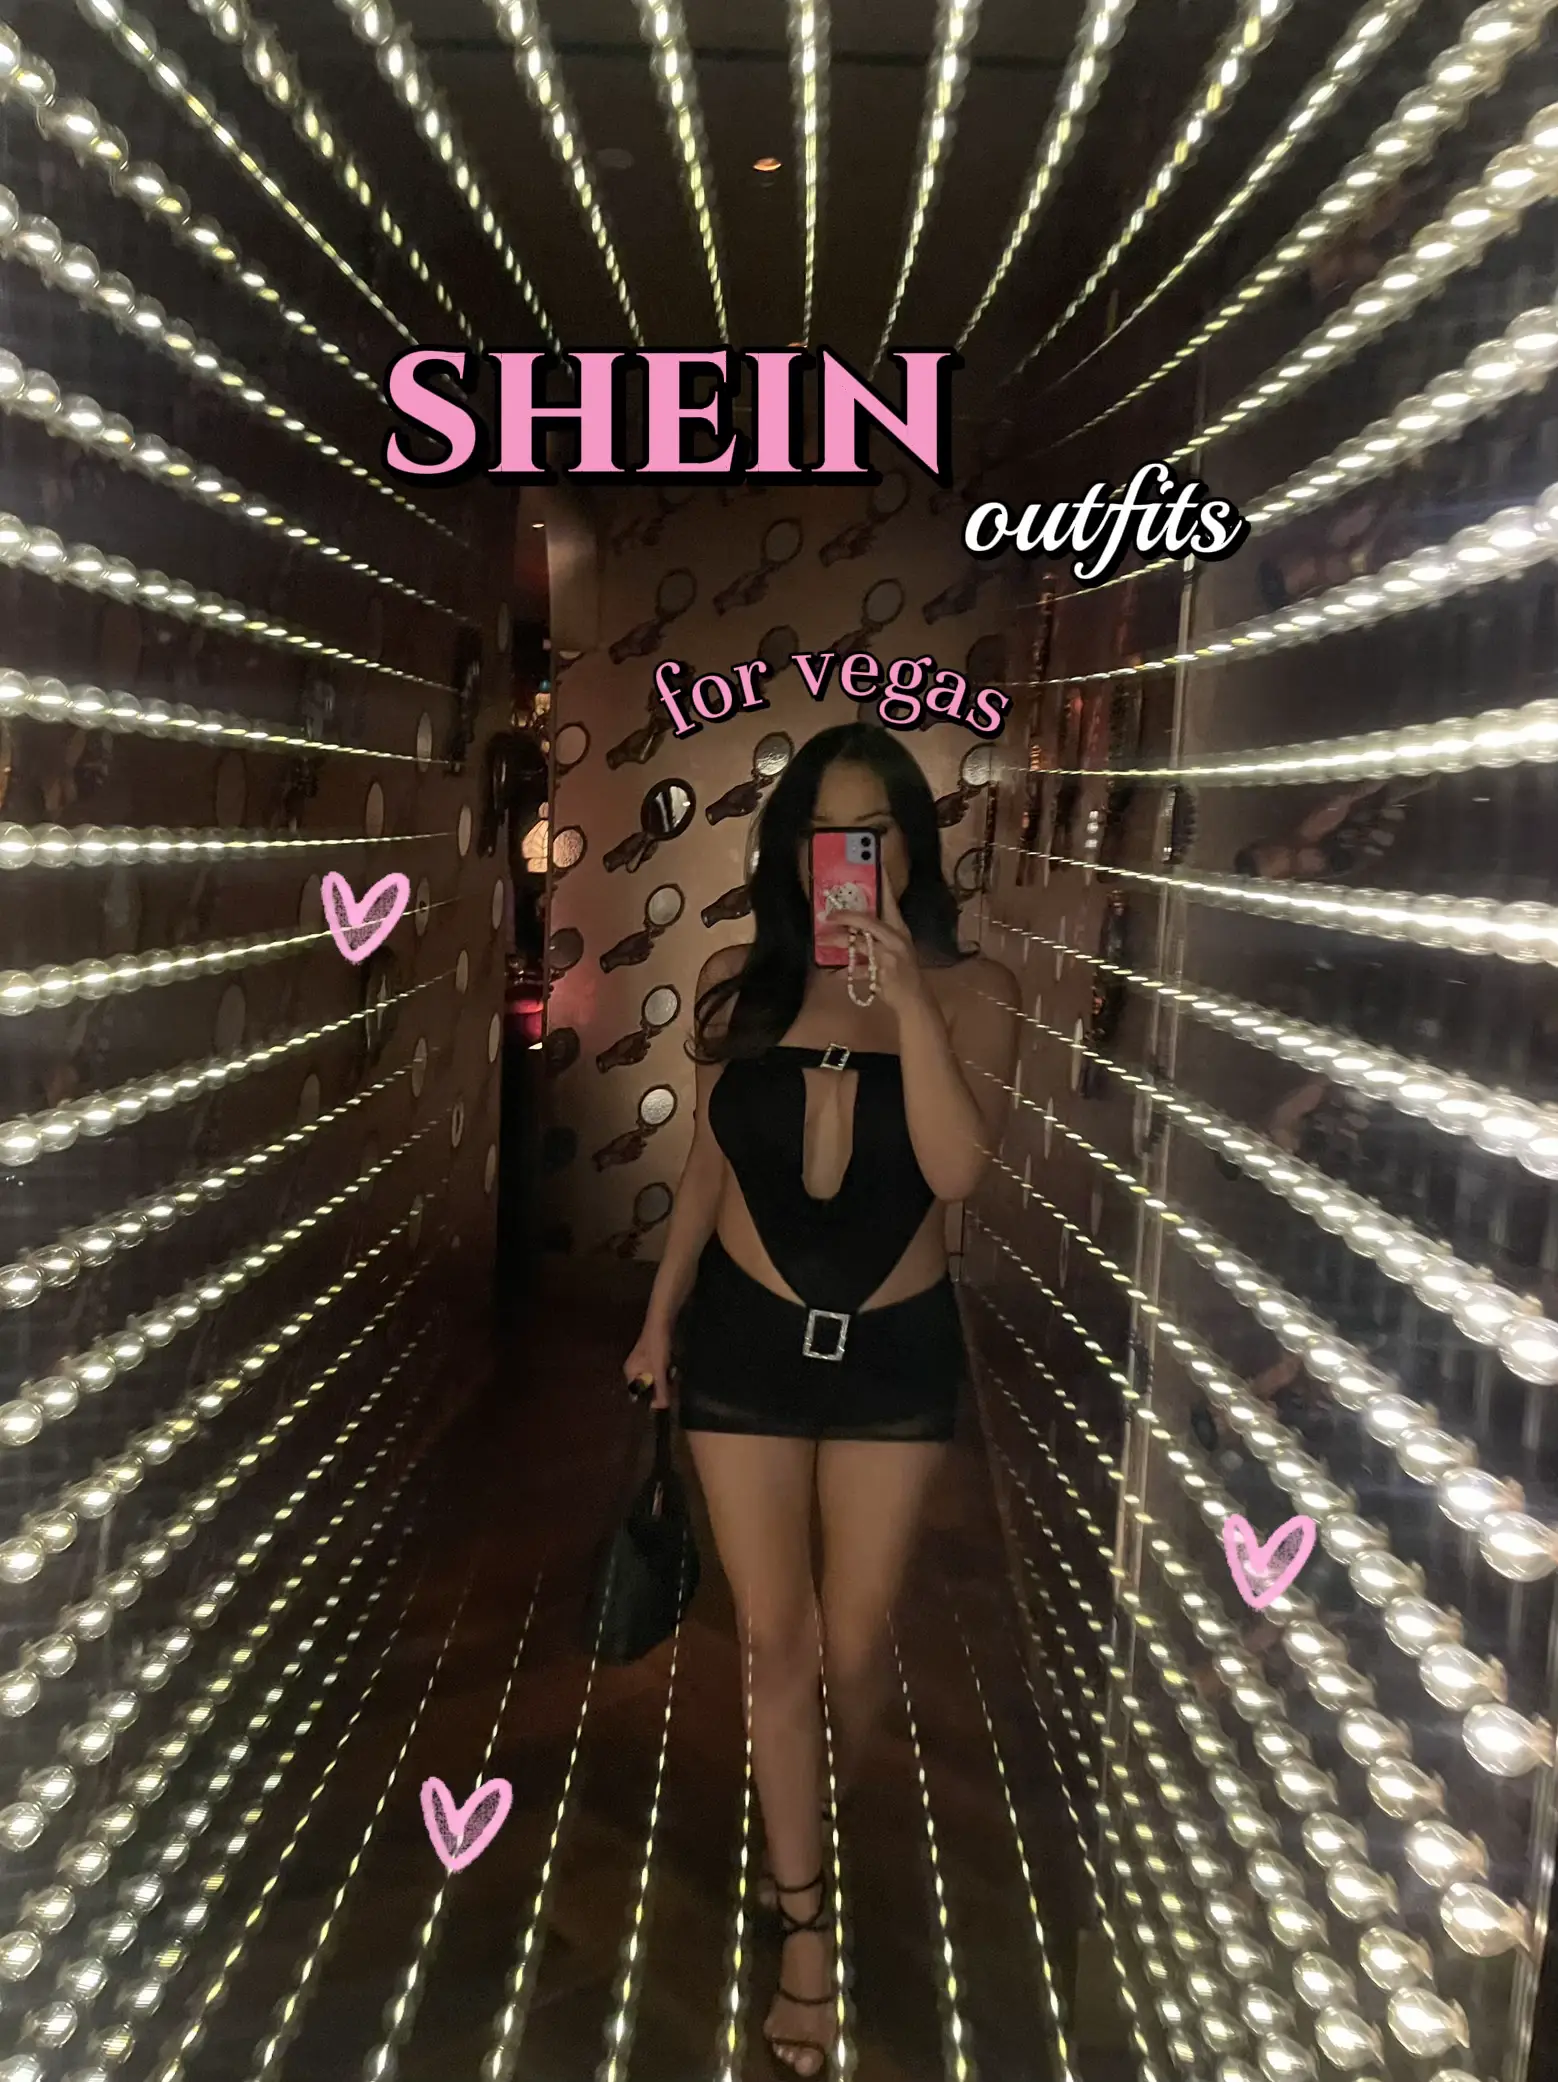 SHEIN - Live in the moment 🌞 IG: fiona.gm Shop now>> https